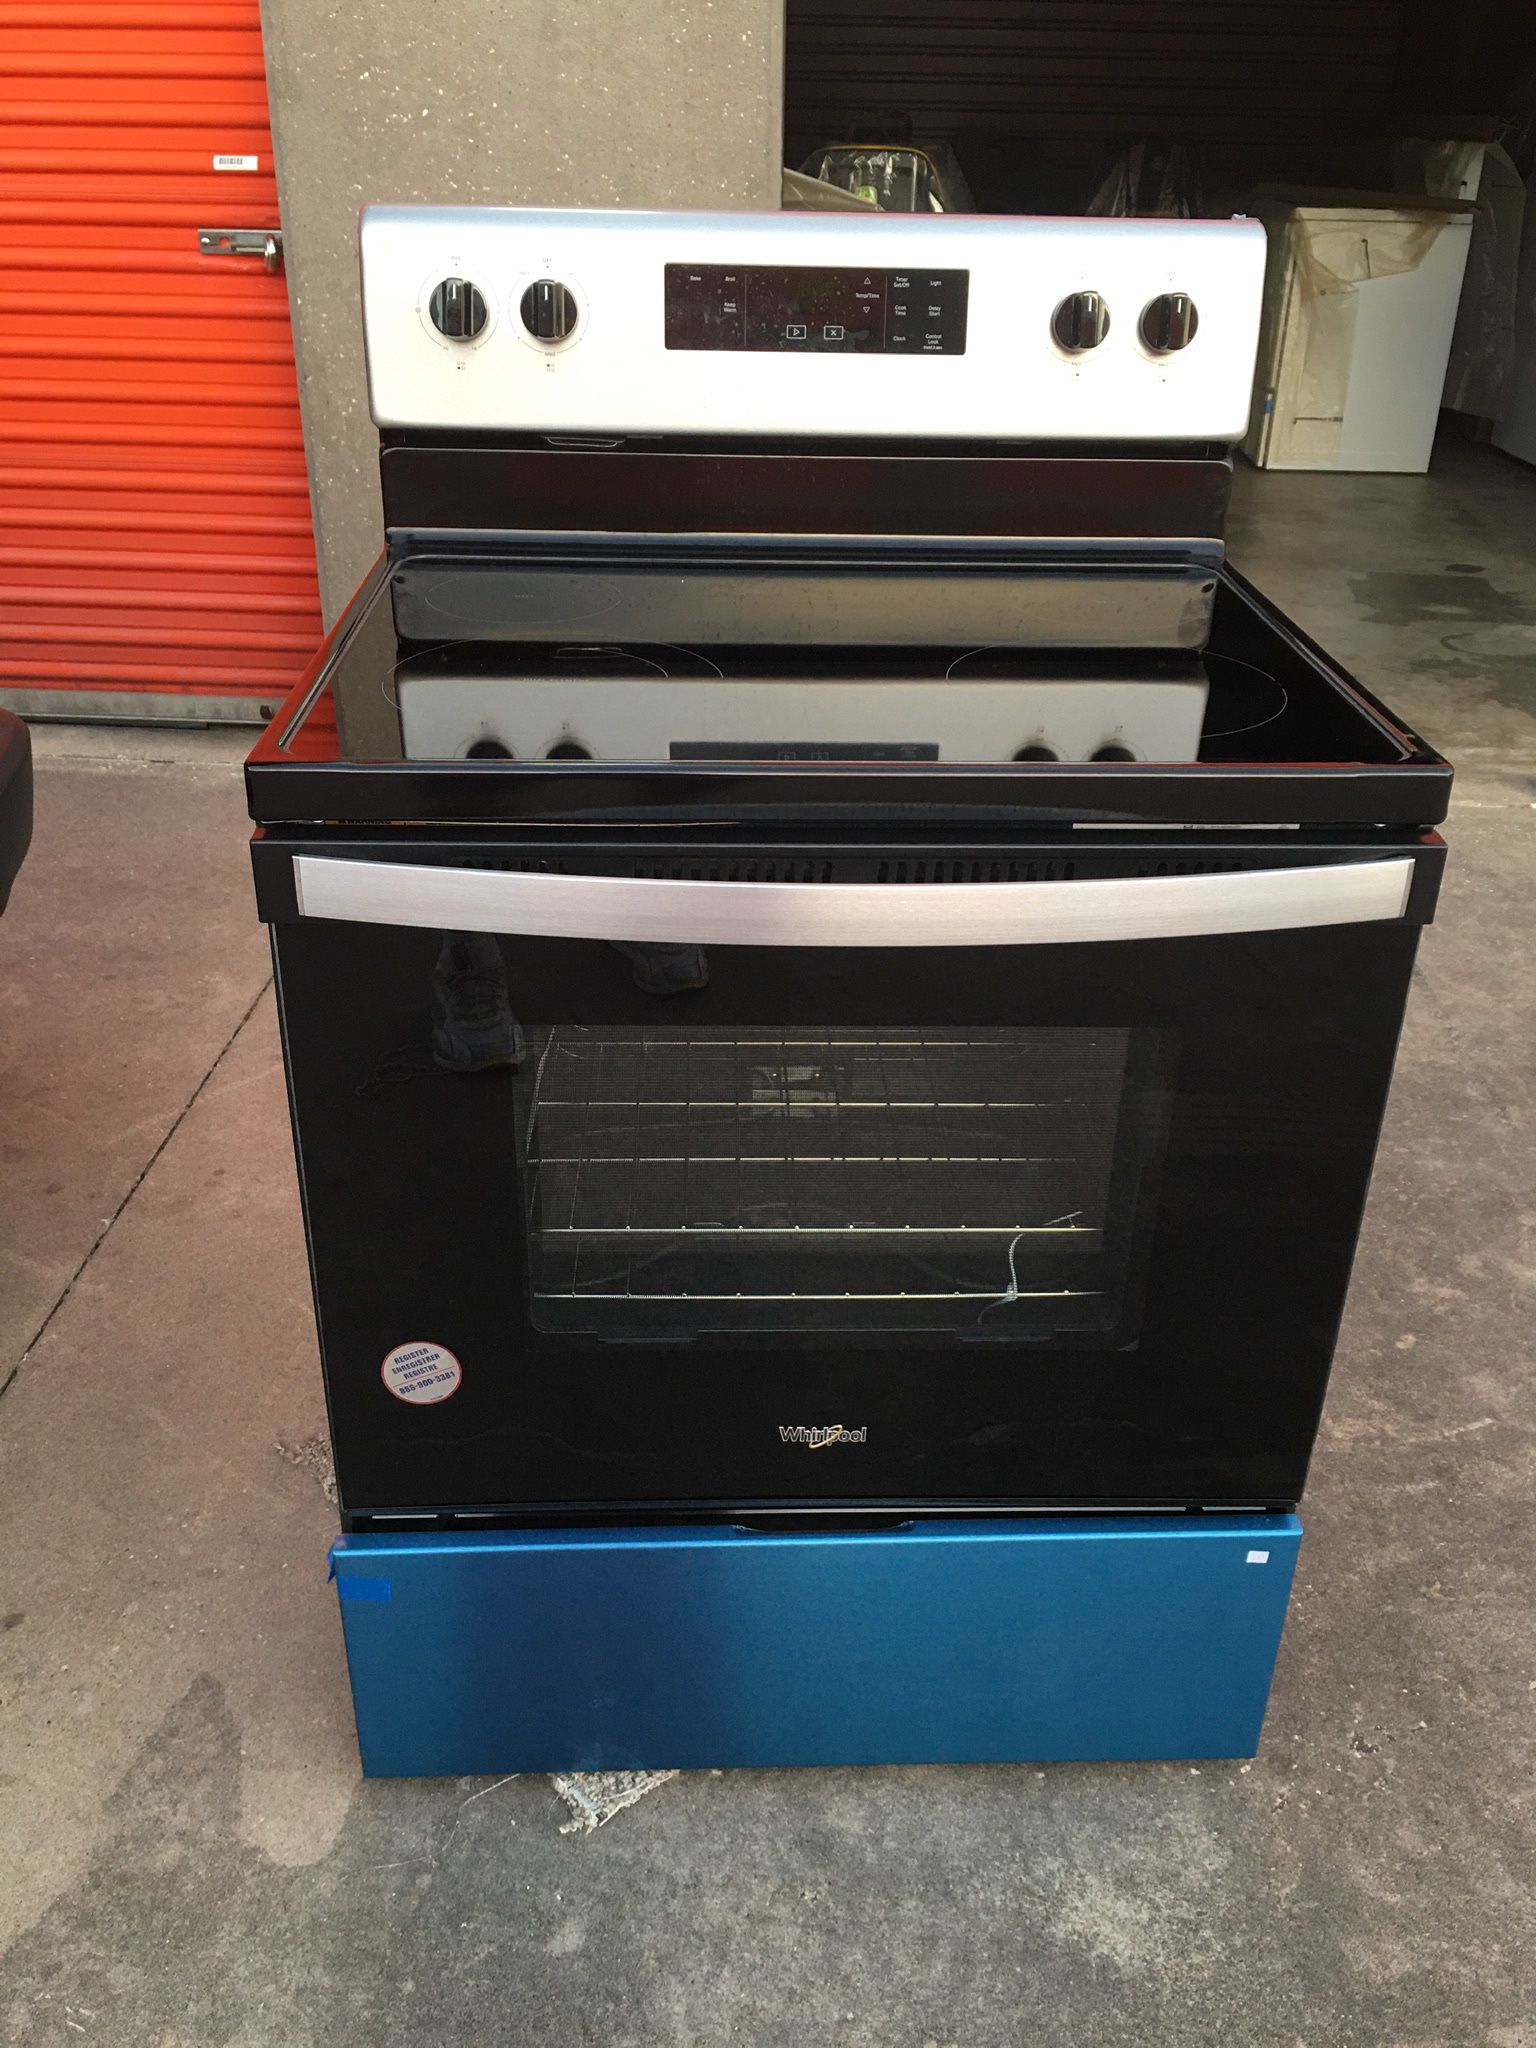 New Scratch And Dent Whirlpool 30-in Glass Top 4 Burners 5.3-cu ft Freestanding Electric Range (Stainless Steel)